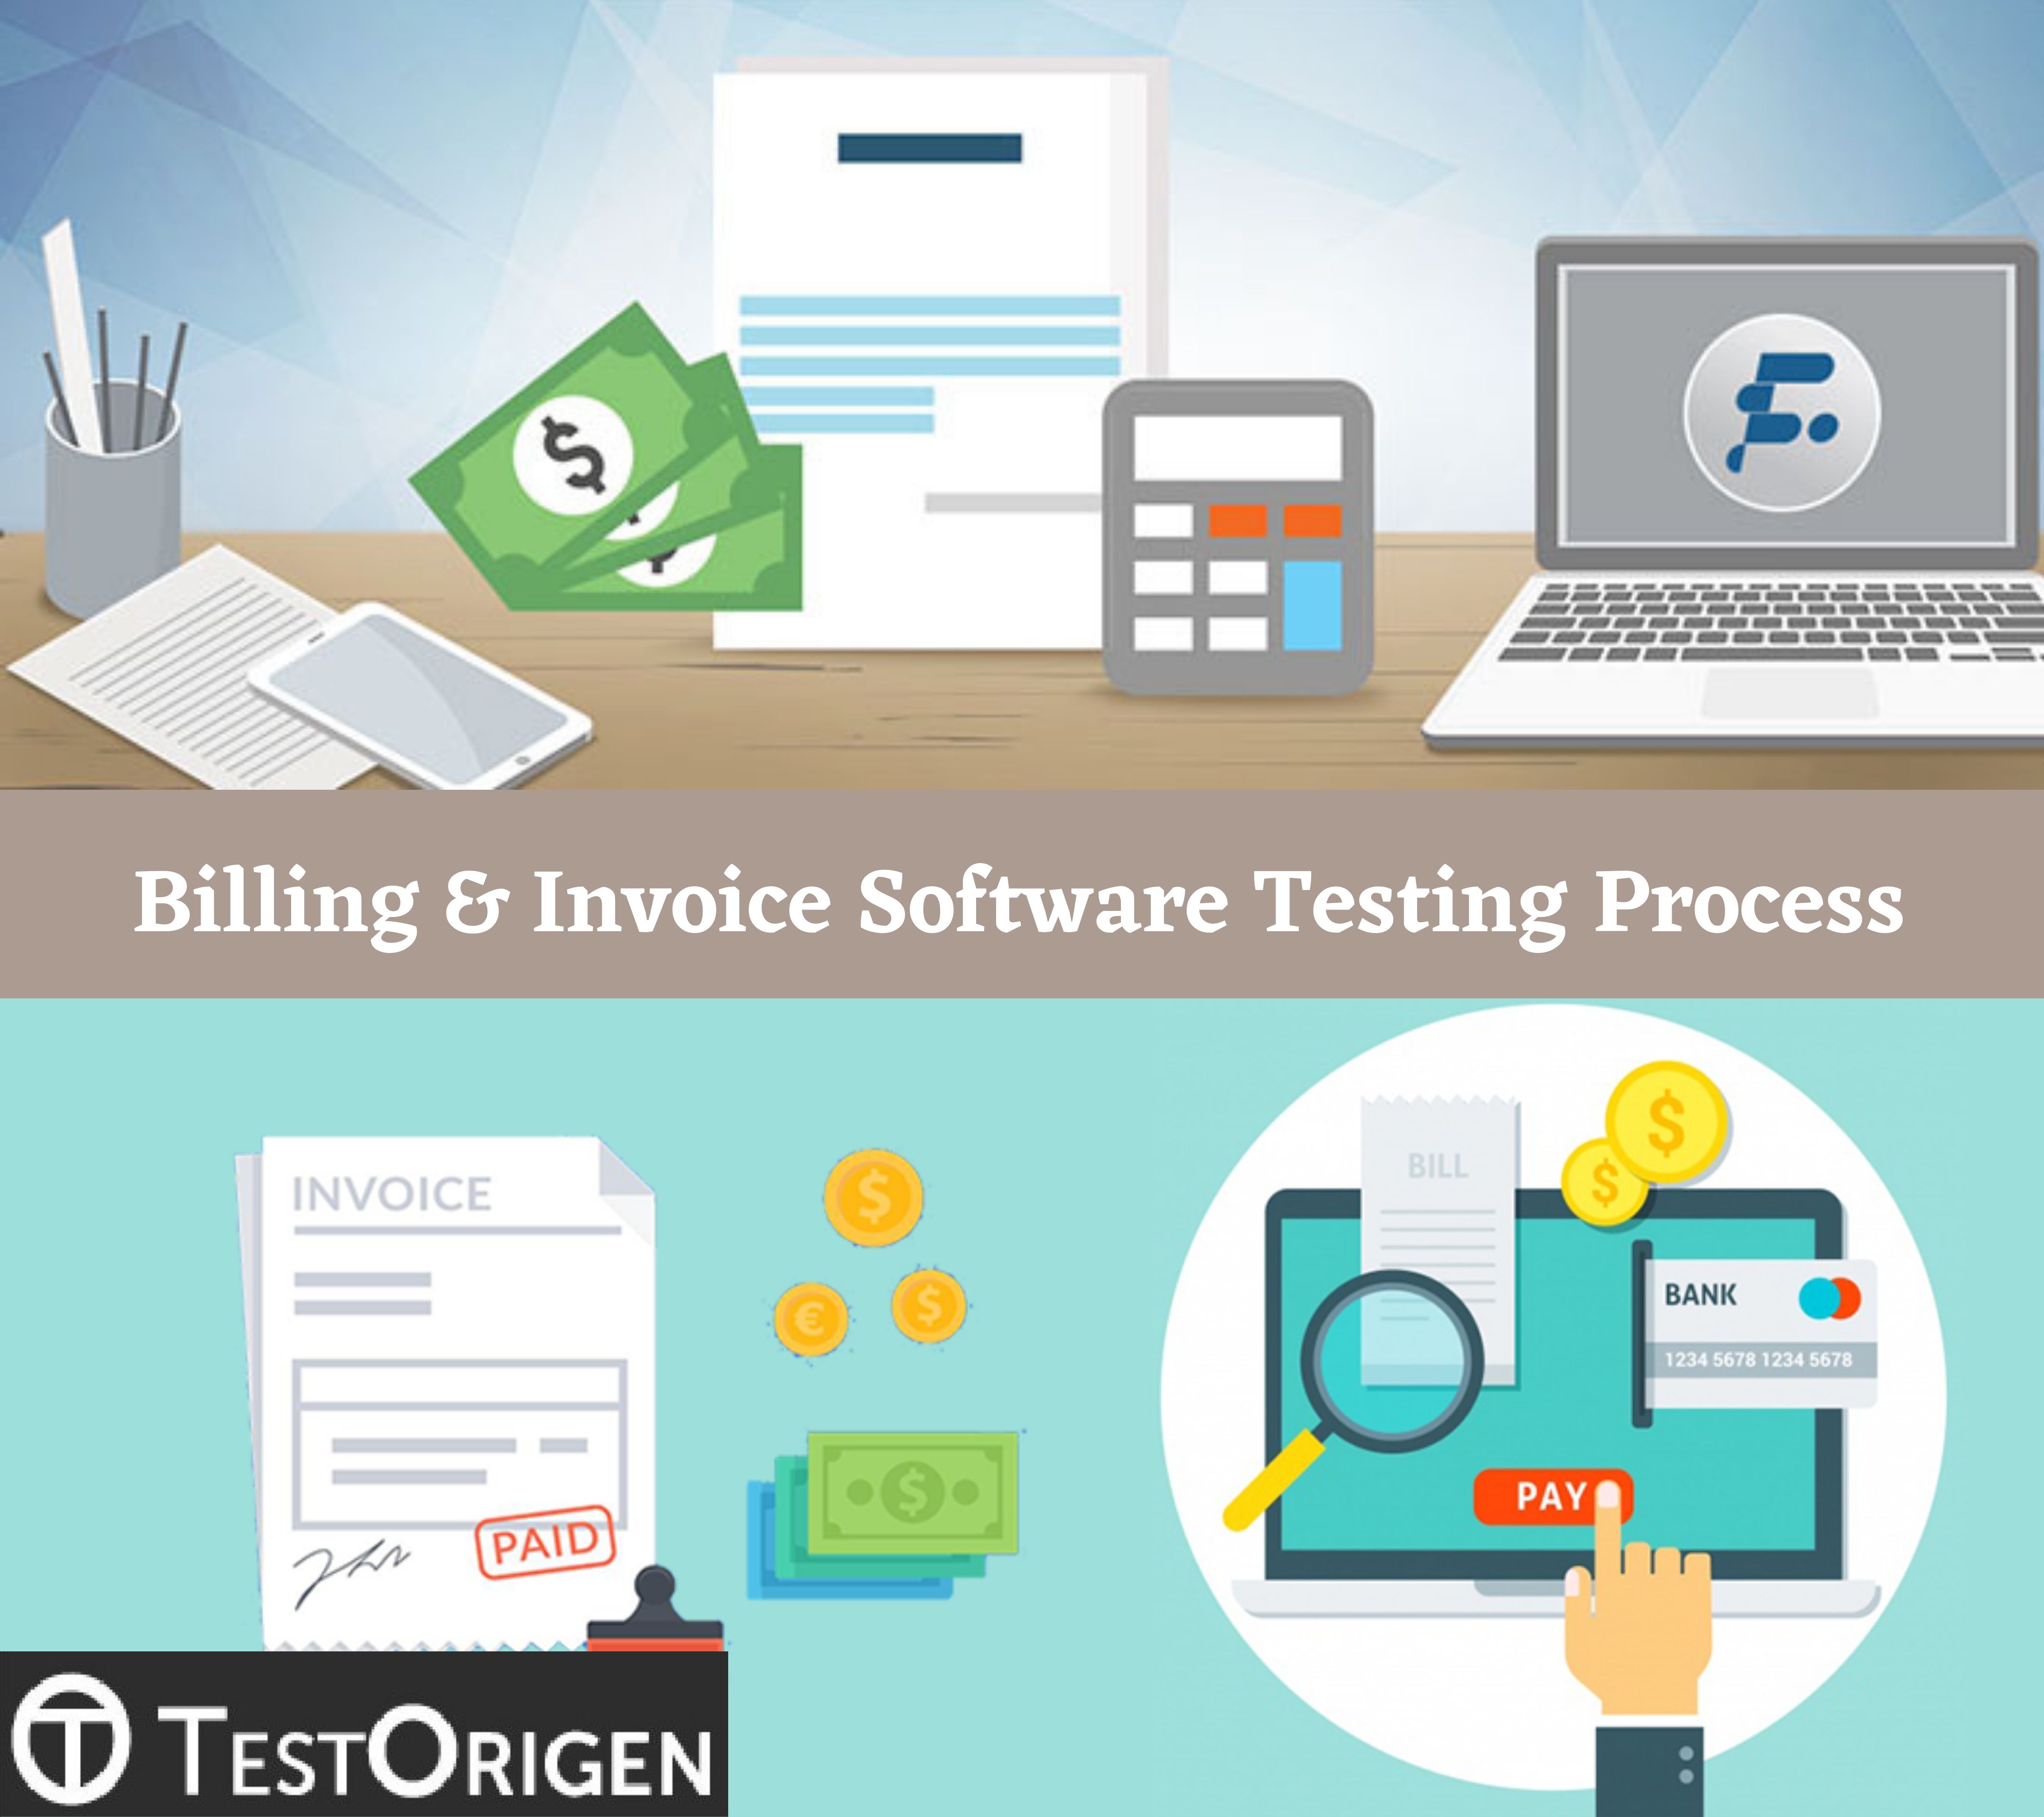 Billing & Invoice Software Testing Process